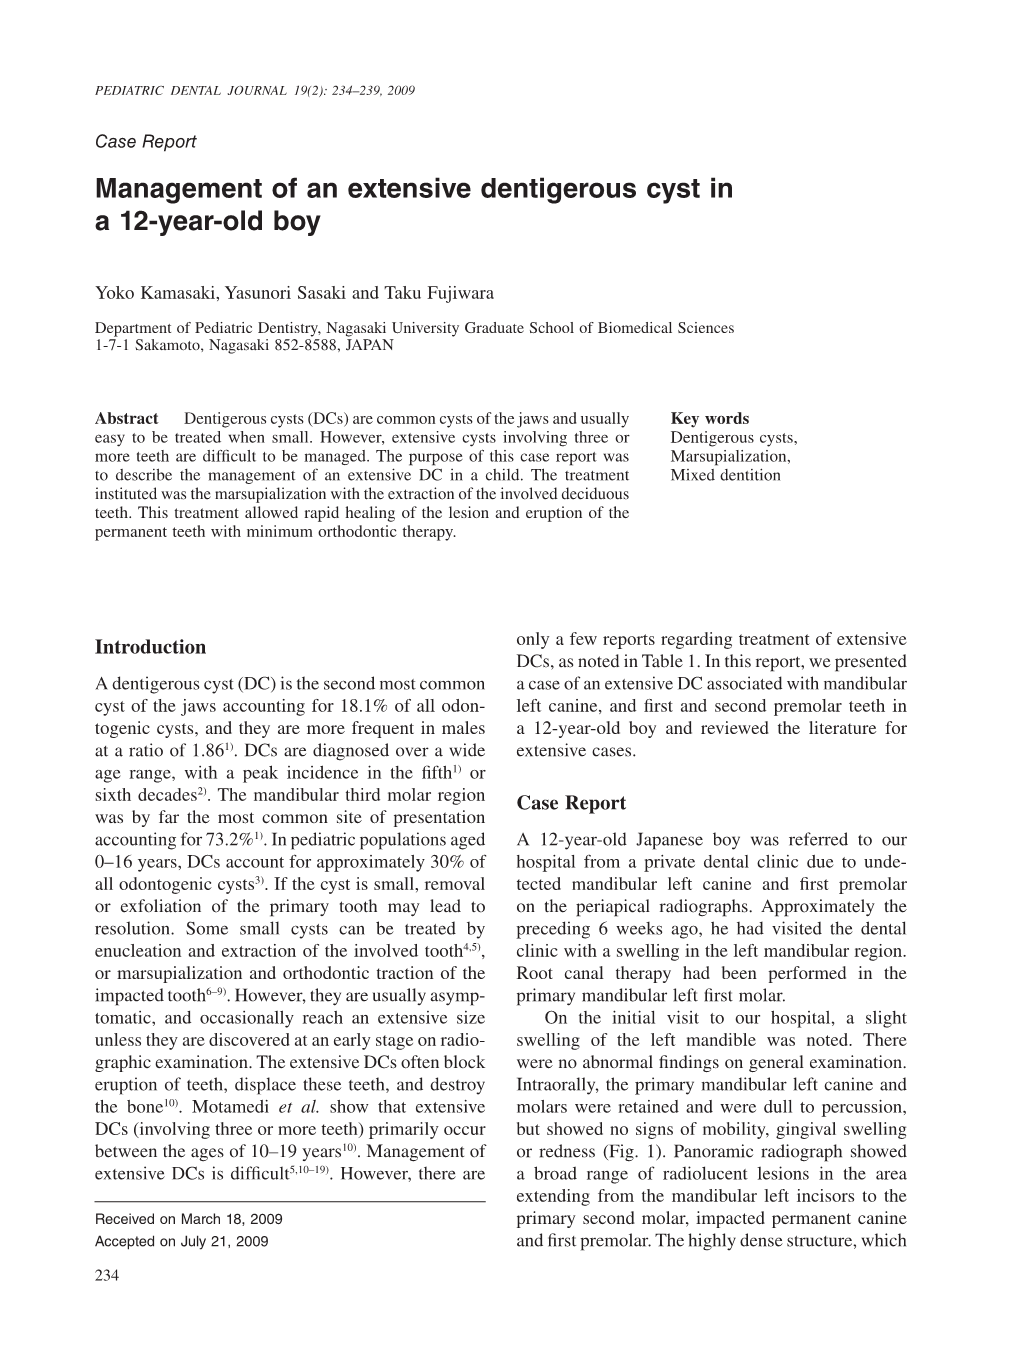 Management of an Extensive Dentigerous Cyst in a 12-Year-Old Boy